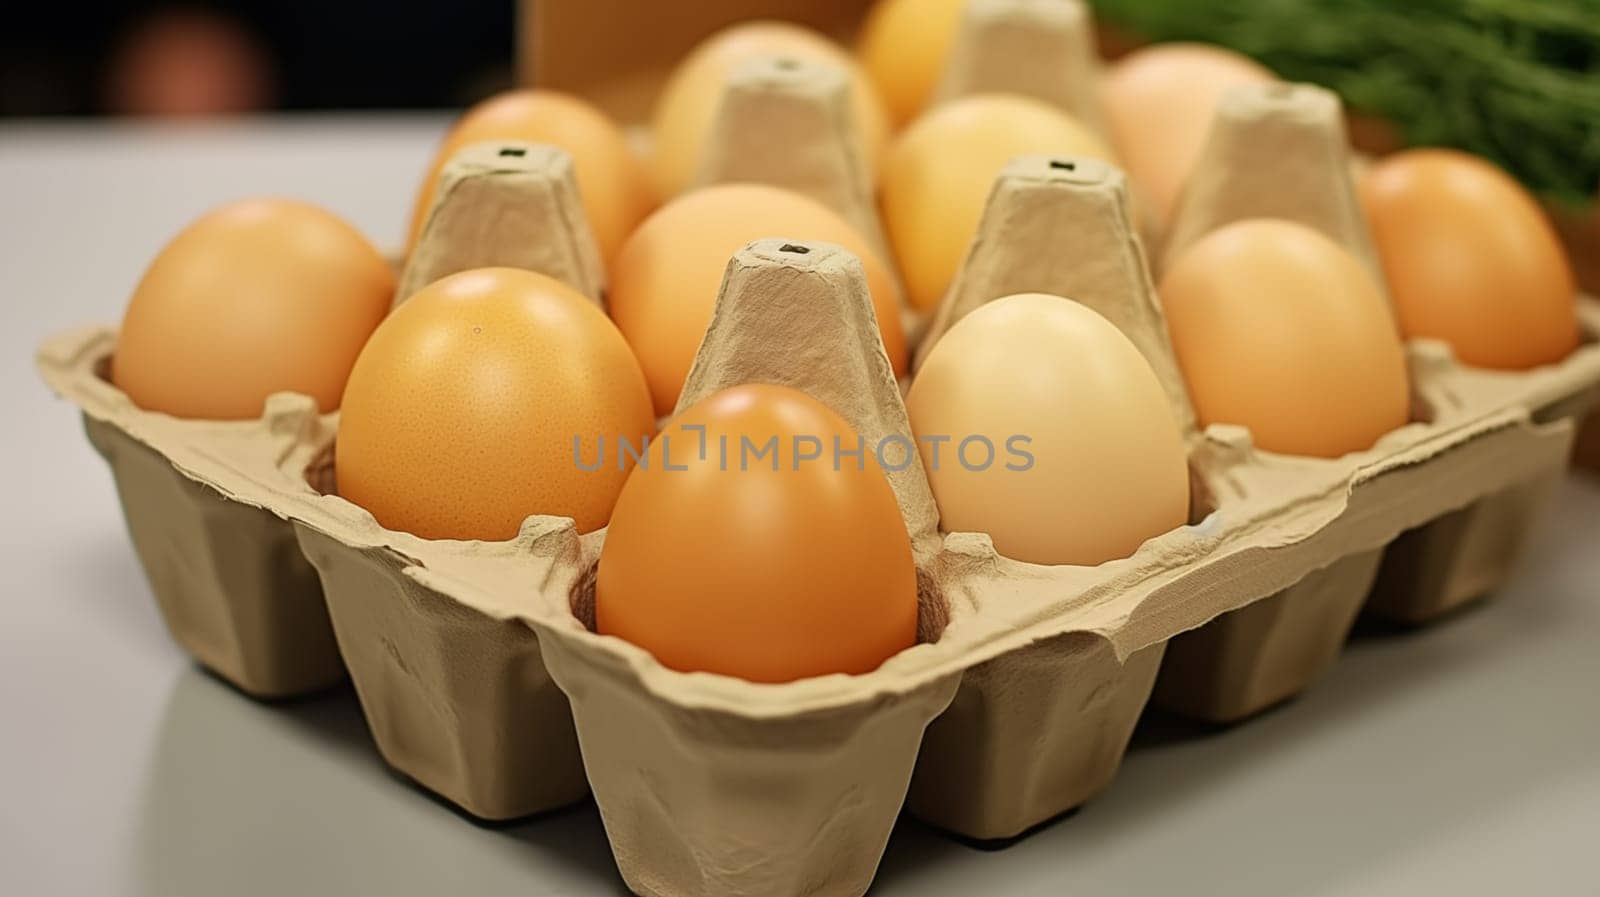 A dozen gold-colored eggs lie in a cardboard package on the table by Zakharova